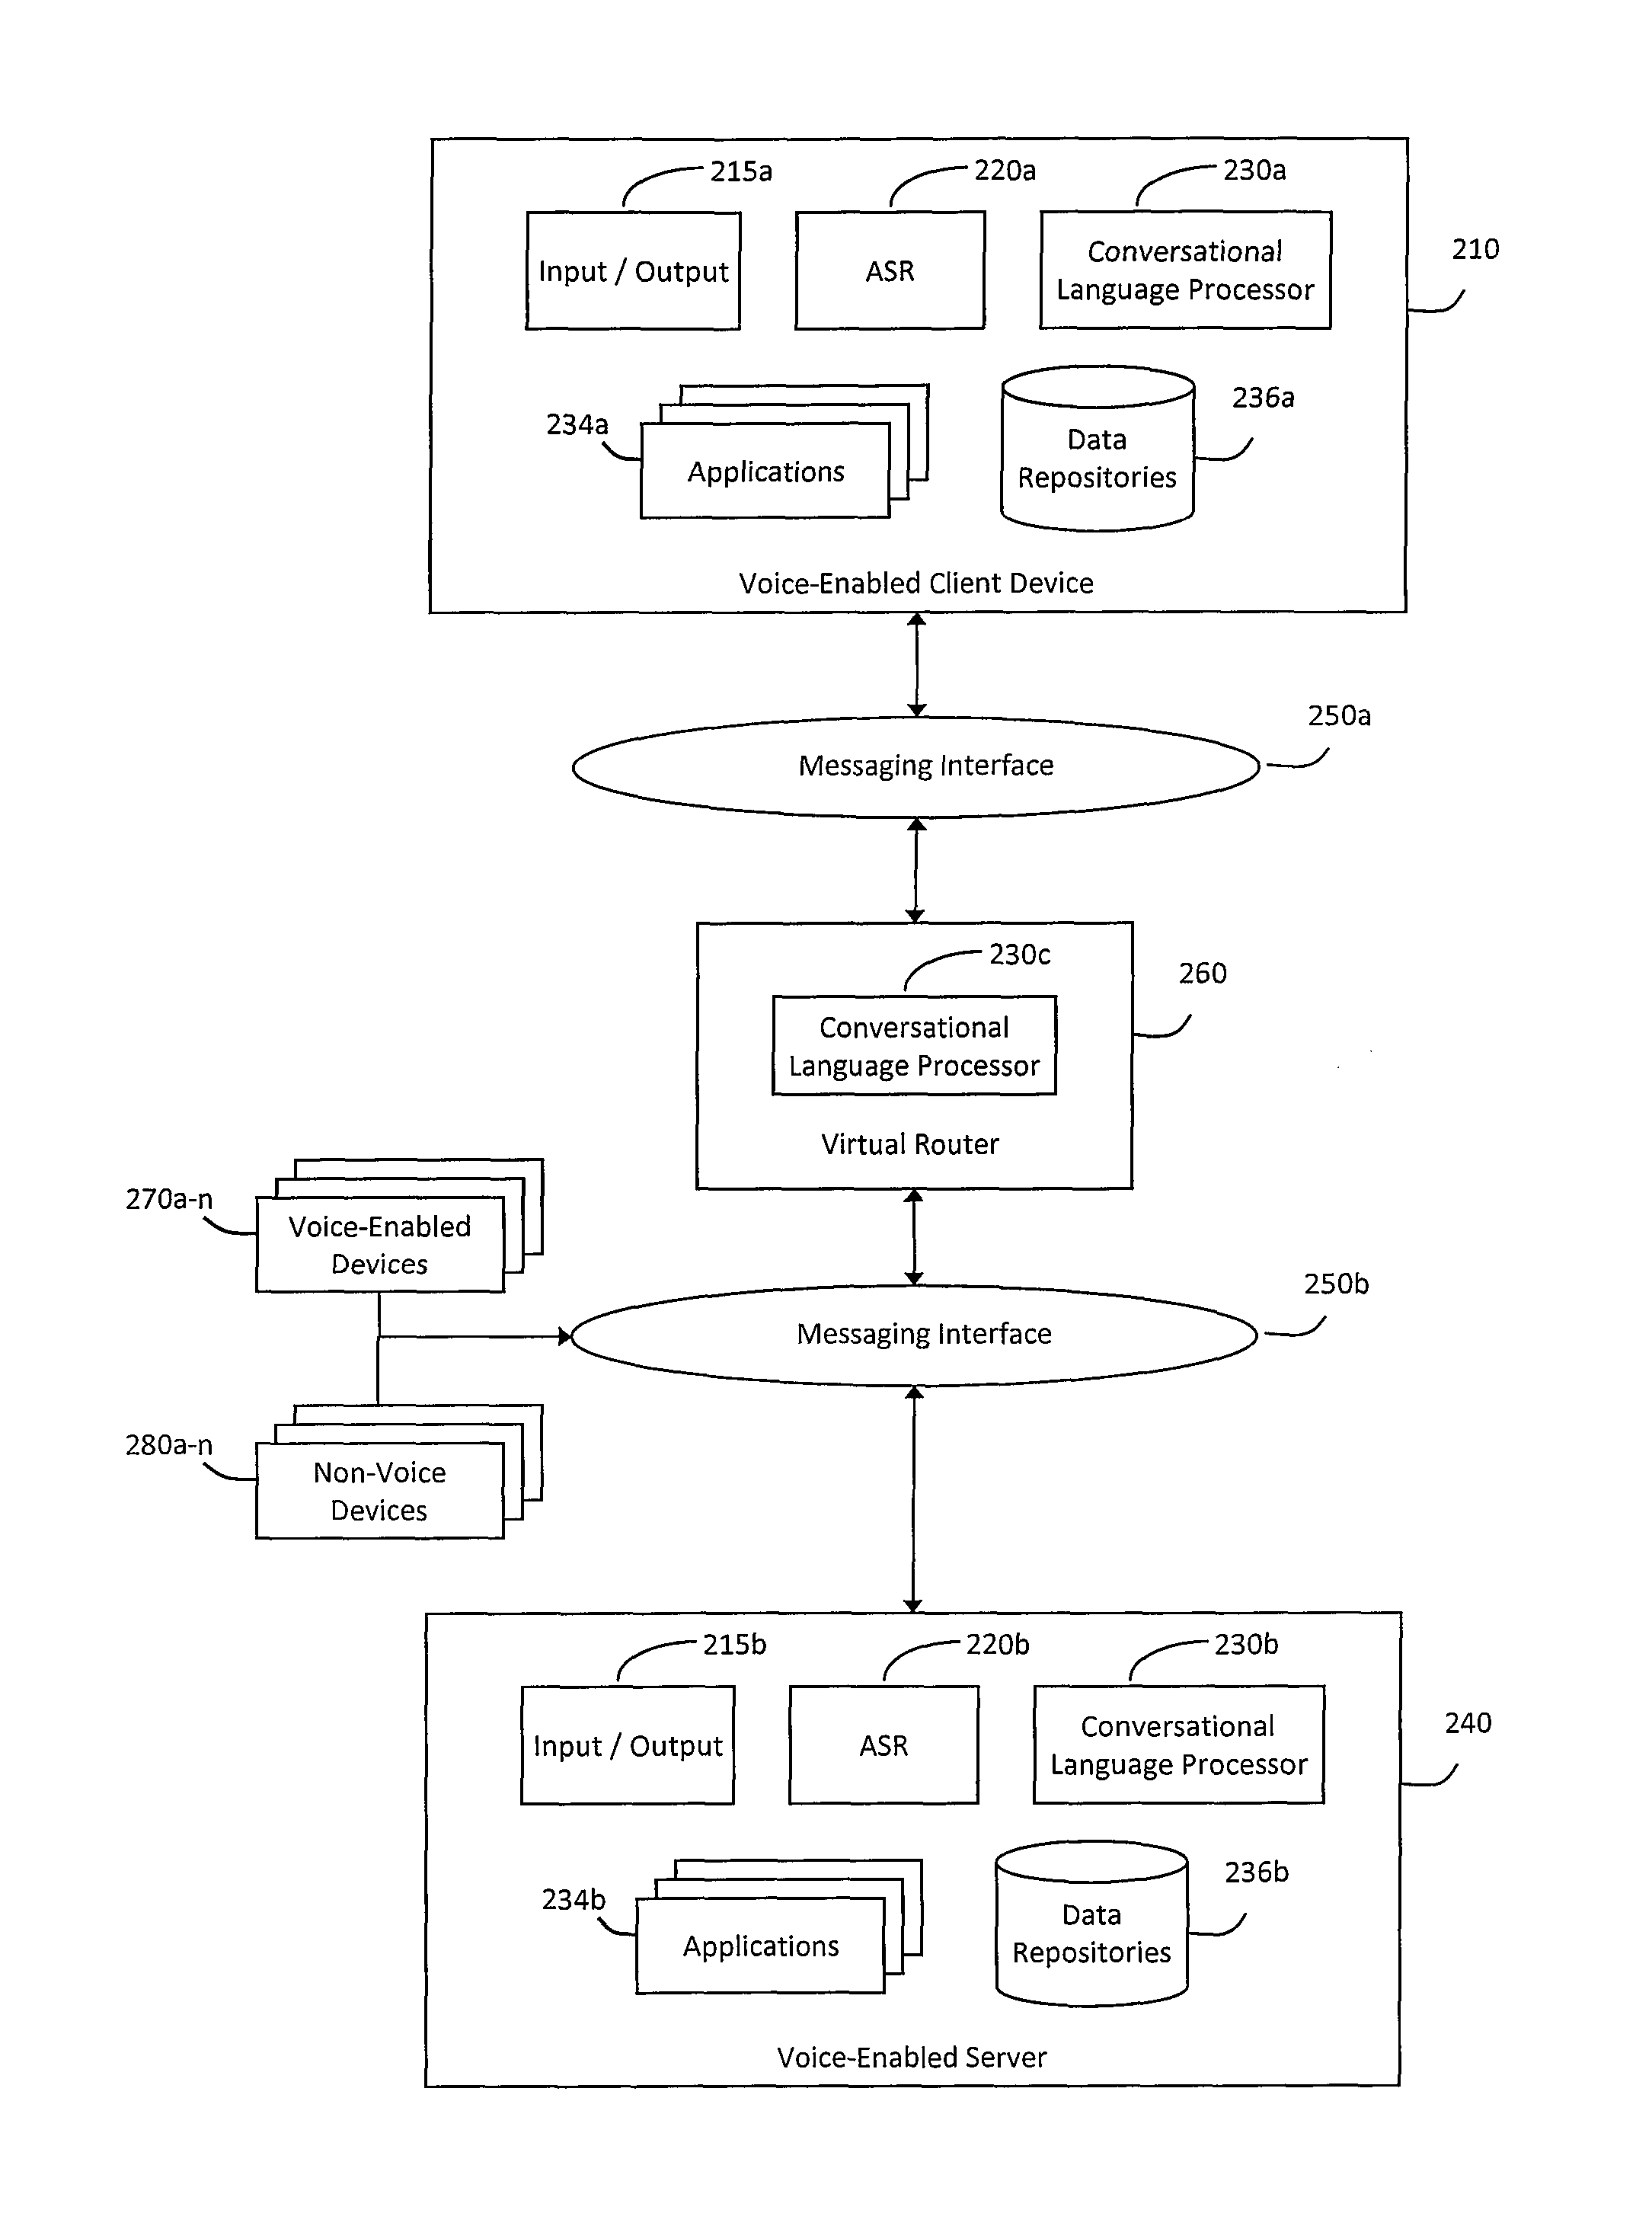 System and method for hybrid processing in a natural language voice services environment